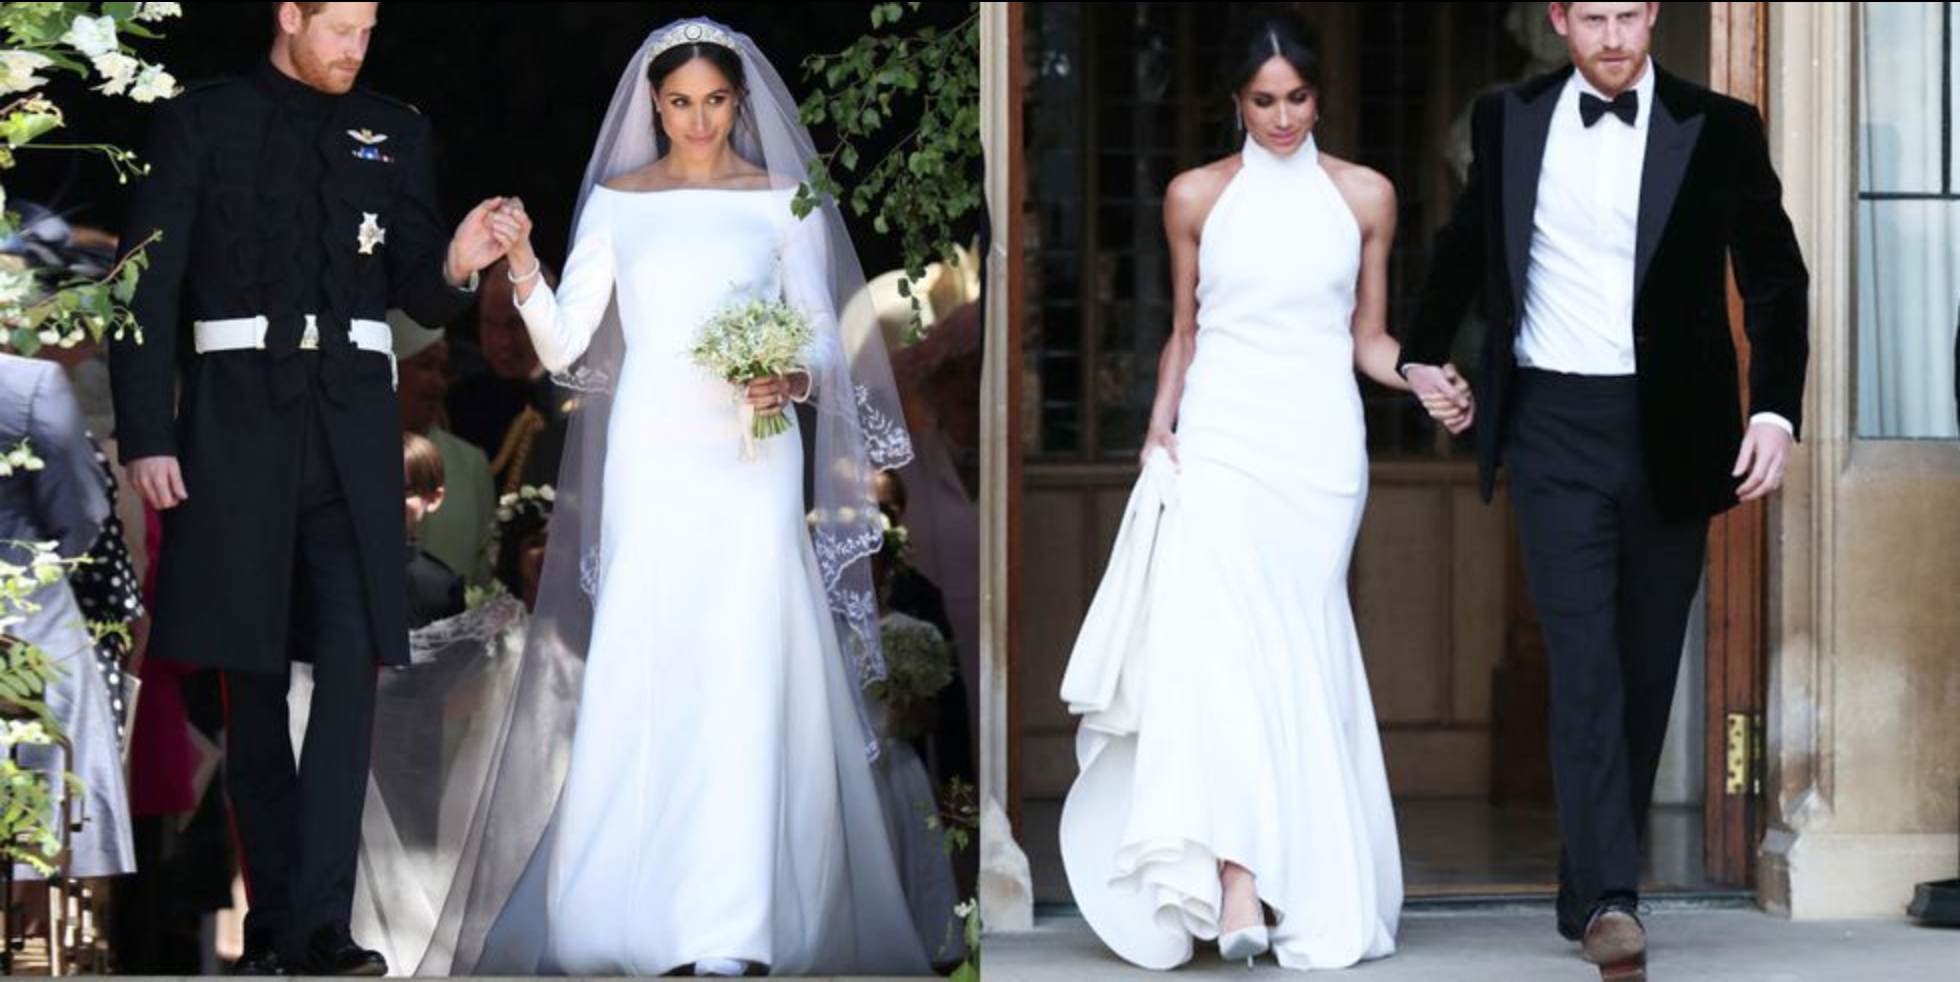 Megan Markel on her wedding day - Pearl Weddings & Events 2019 trends